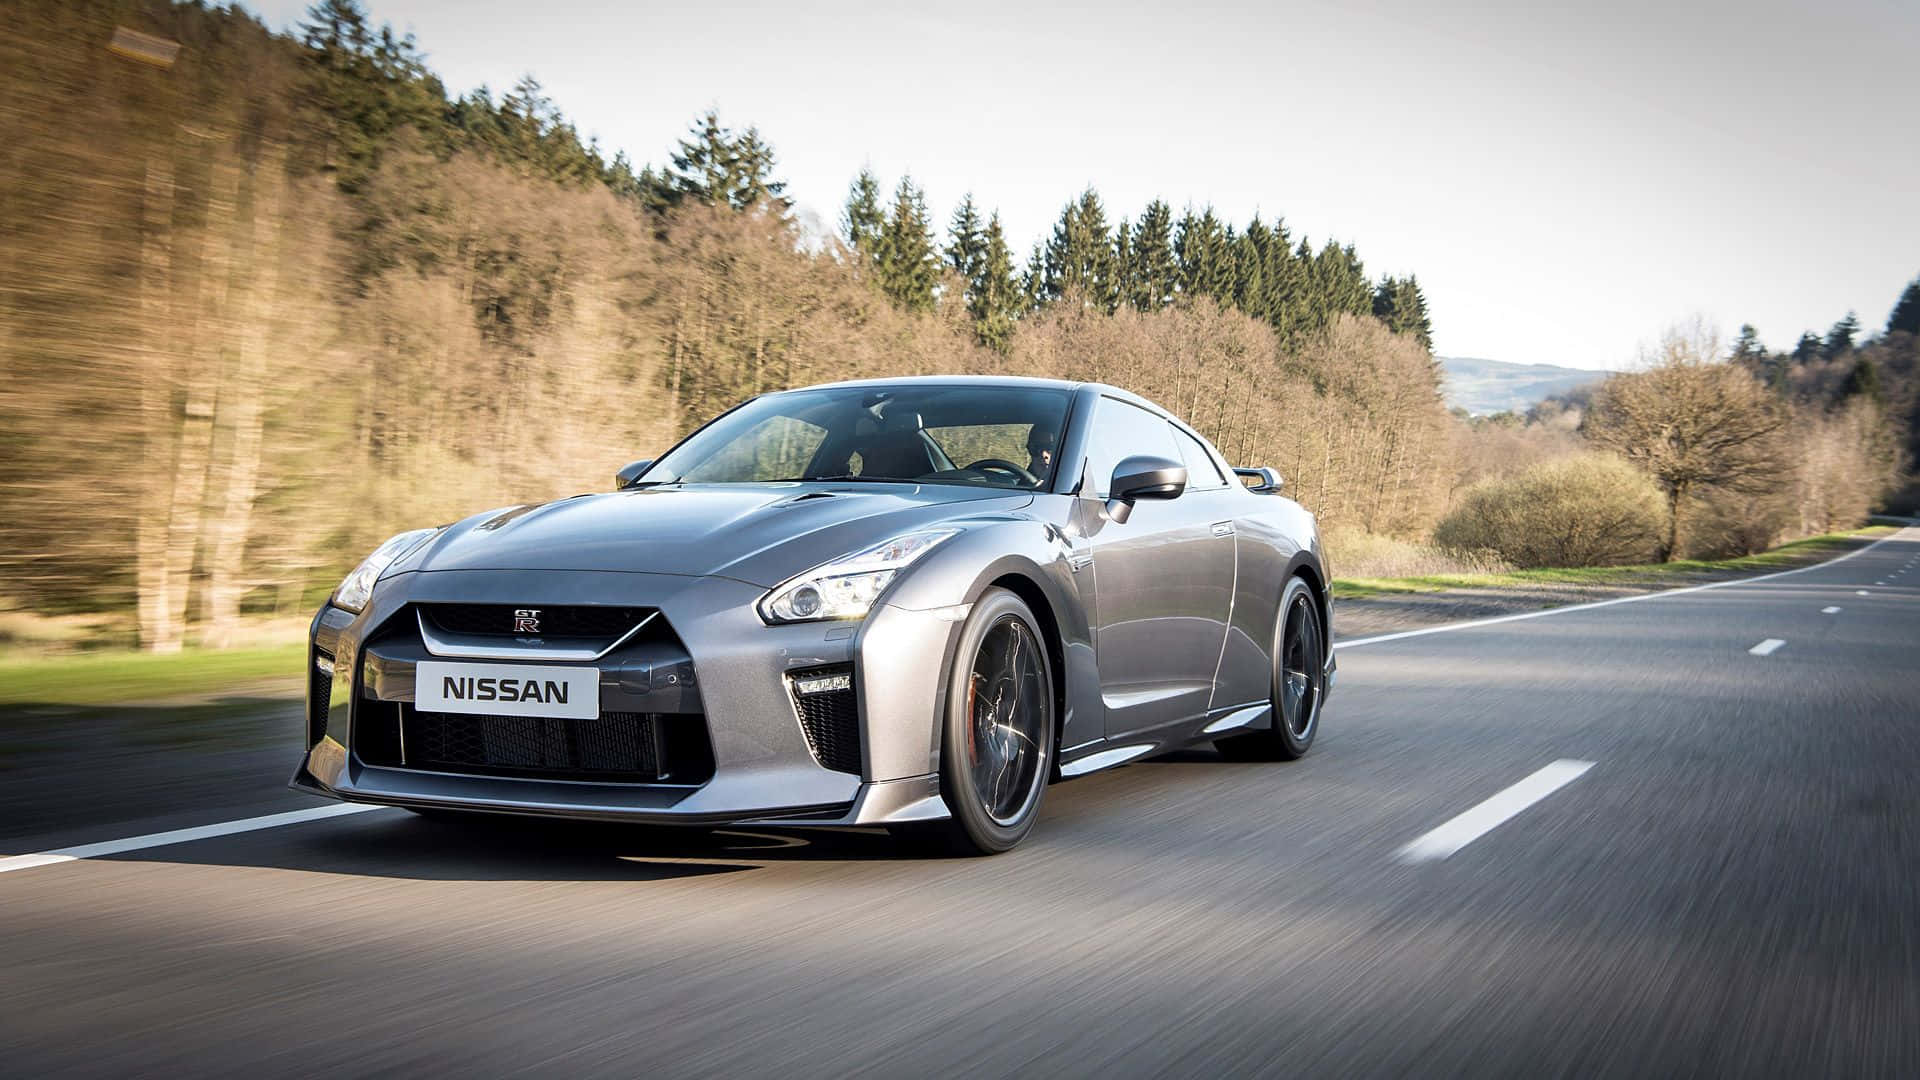 Image  A Red Nissan GTR Racing Through The Streets